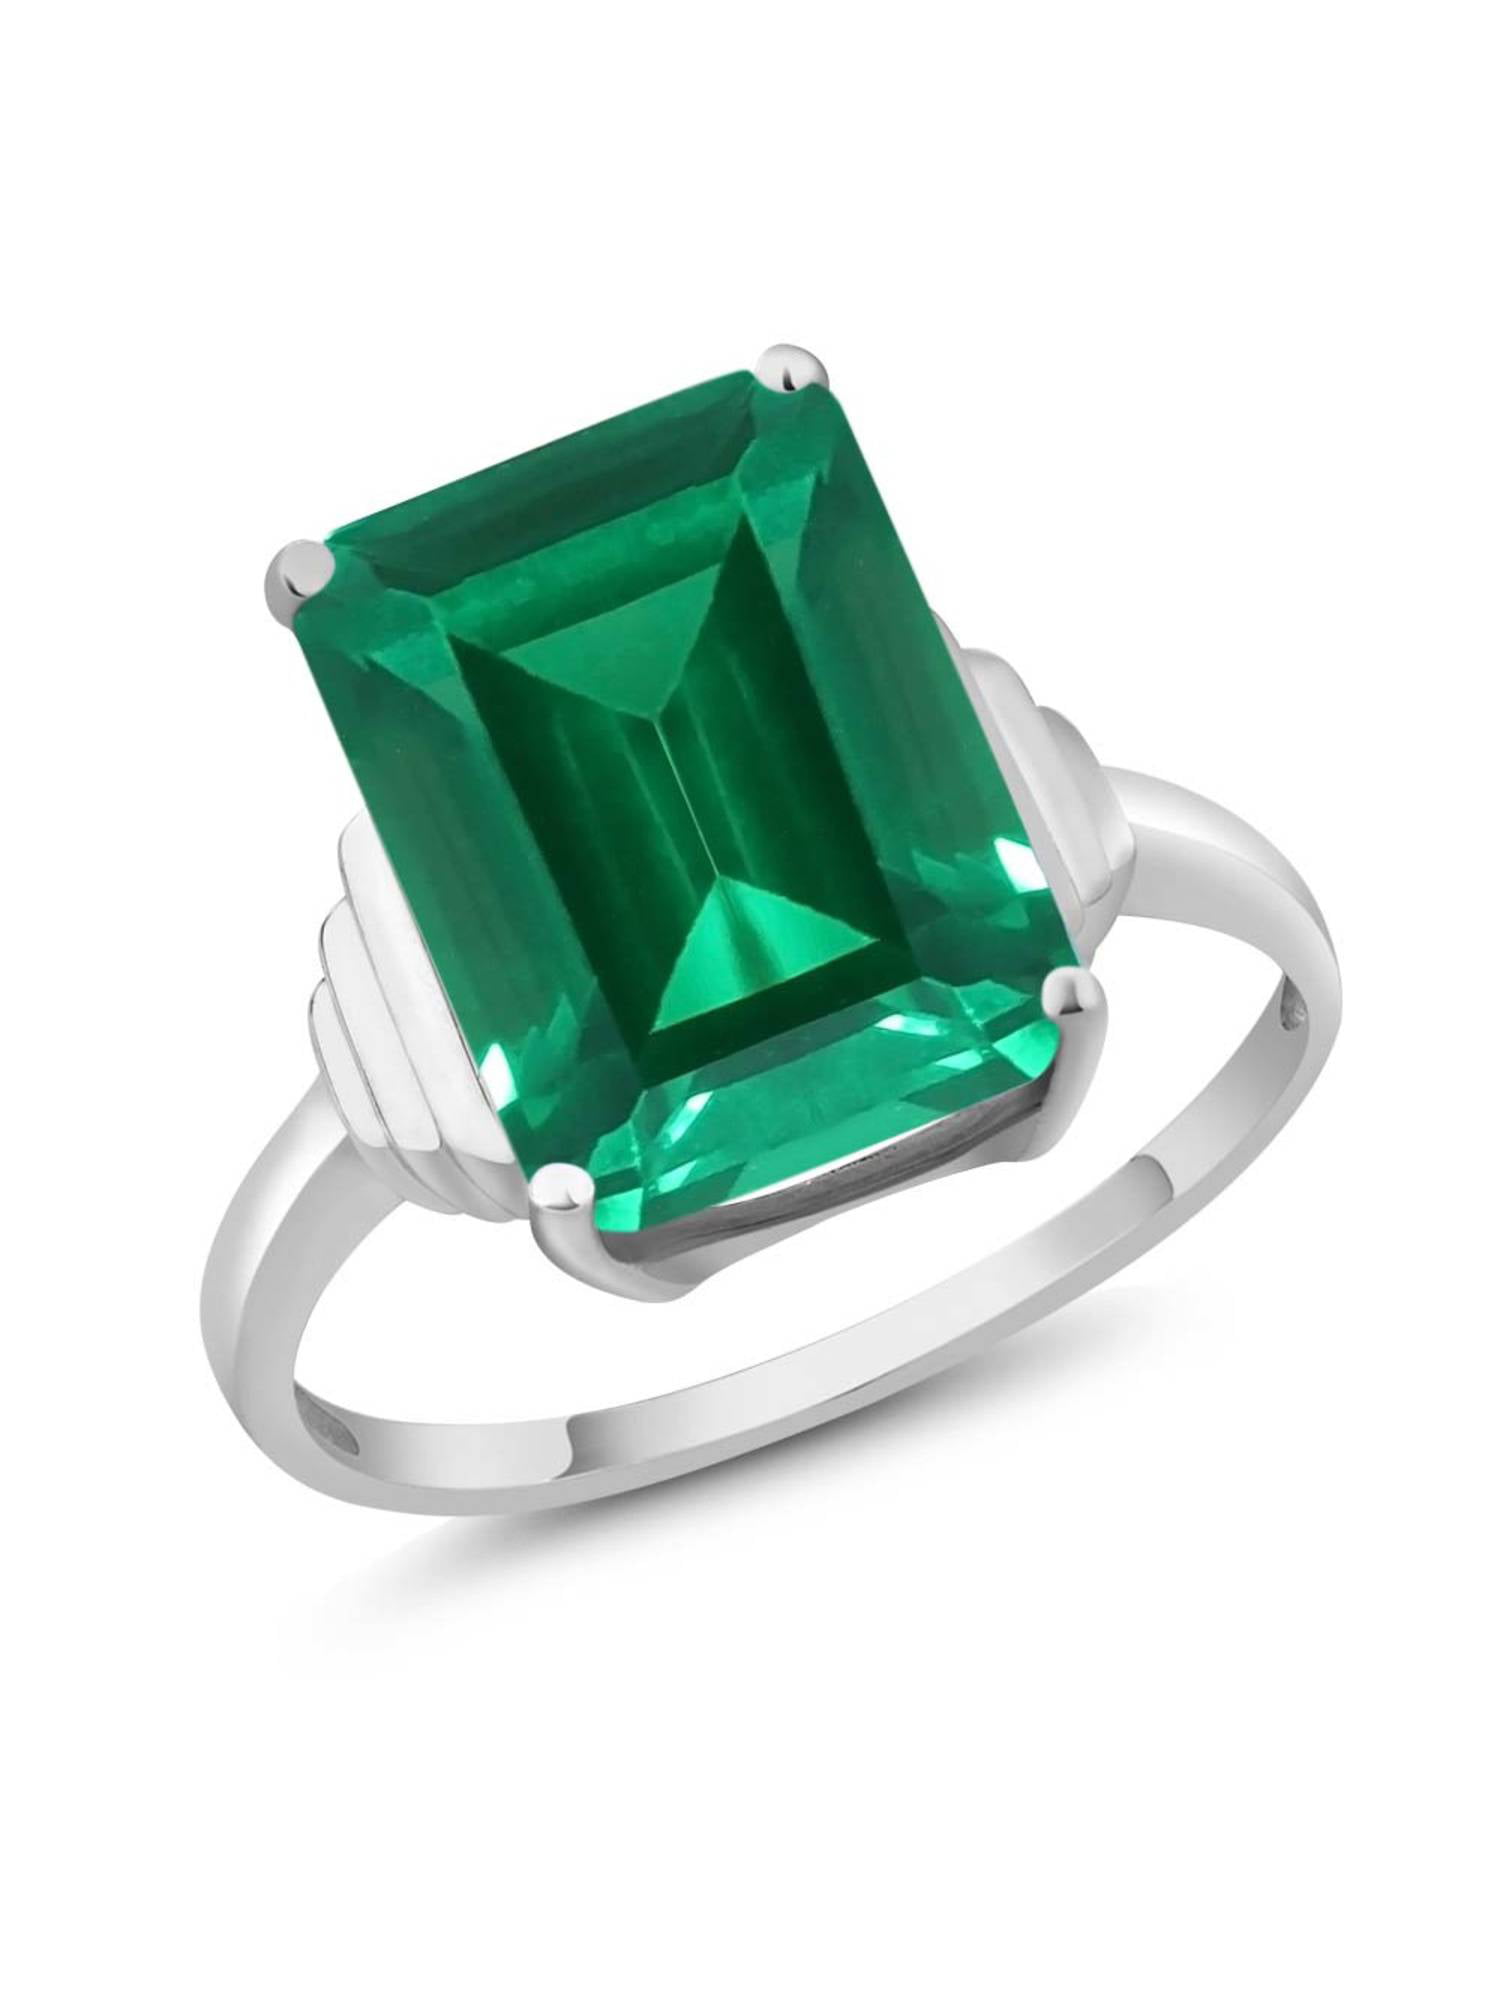 Gem Stone King 925 Sterling Silver Green Nano Emerald Women's Ring 5.00 Ct, Emerald Cut, Available 5,6,7,8,9 